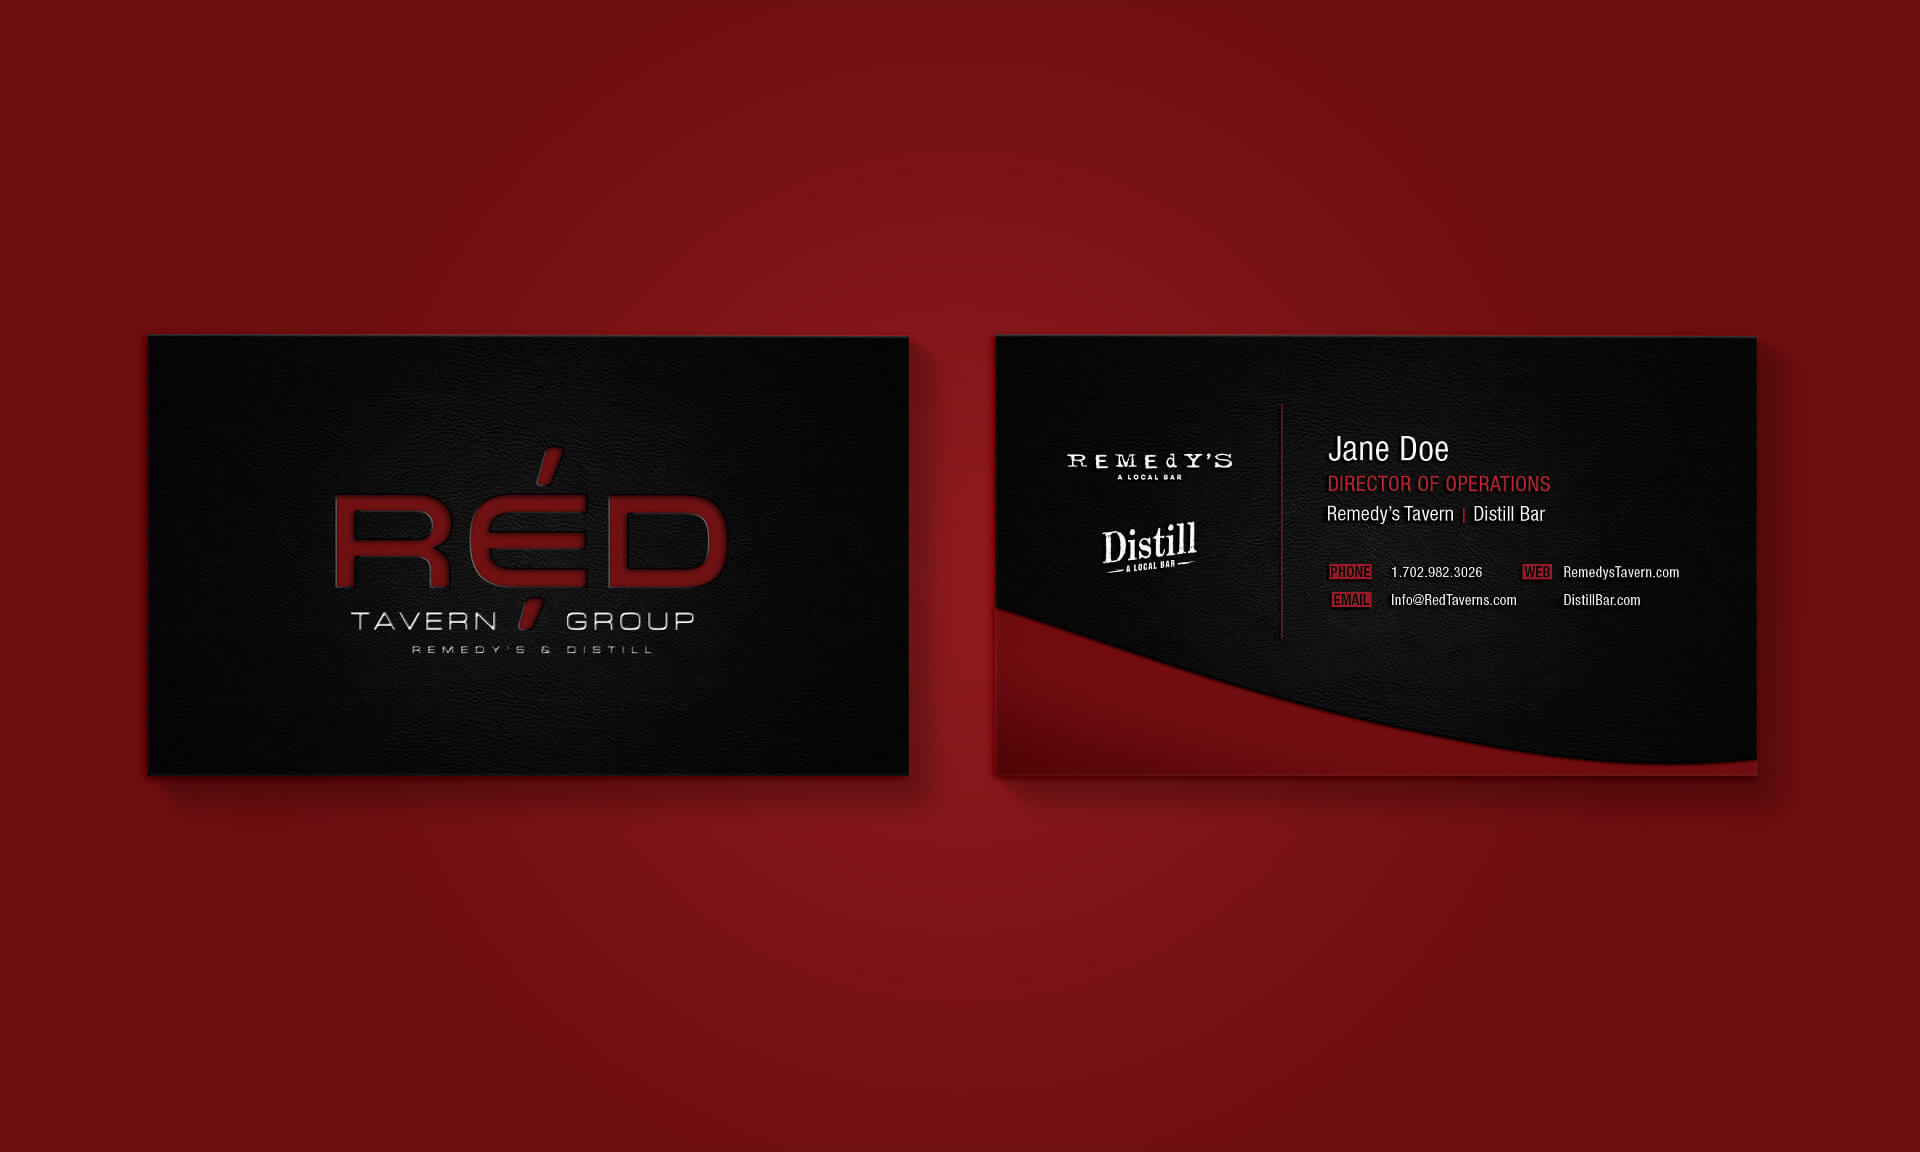 R&D Tavern Group business cards